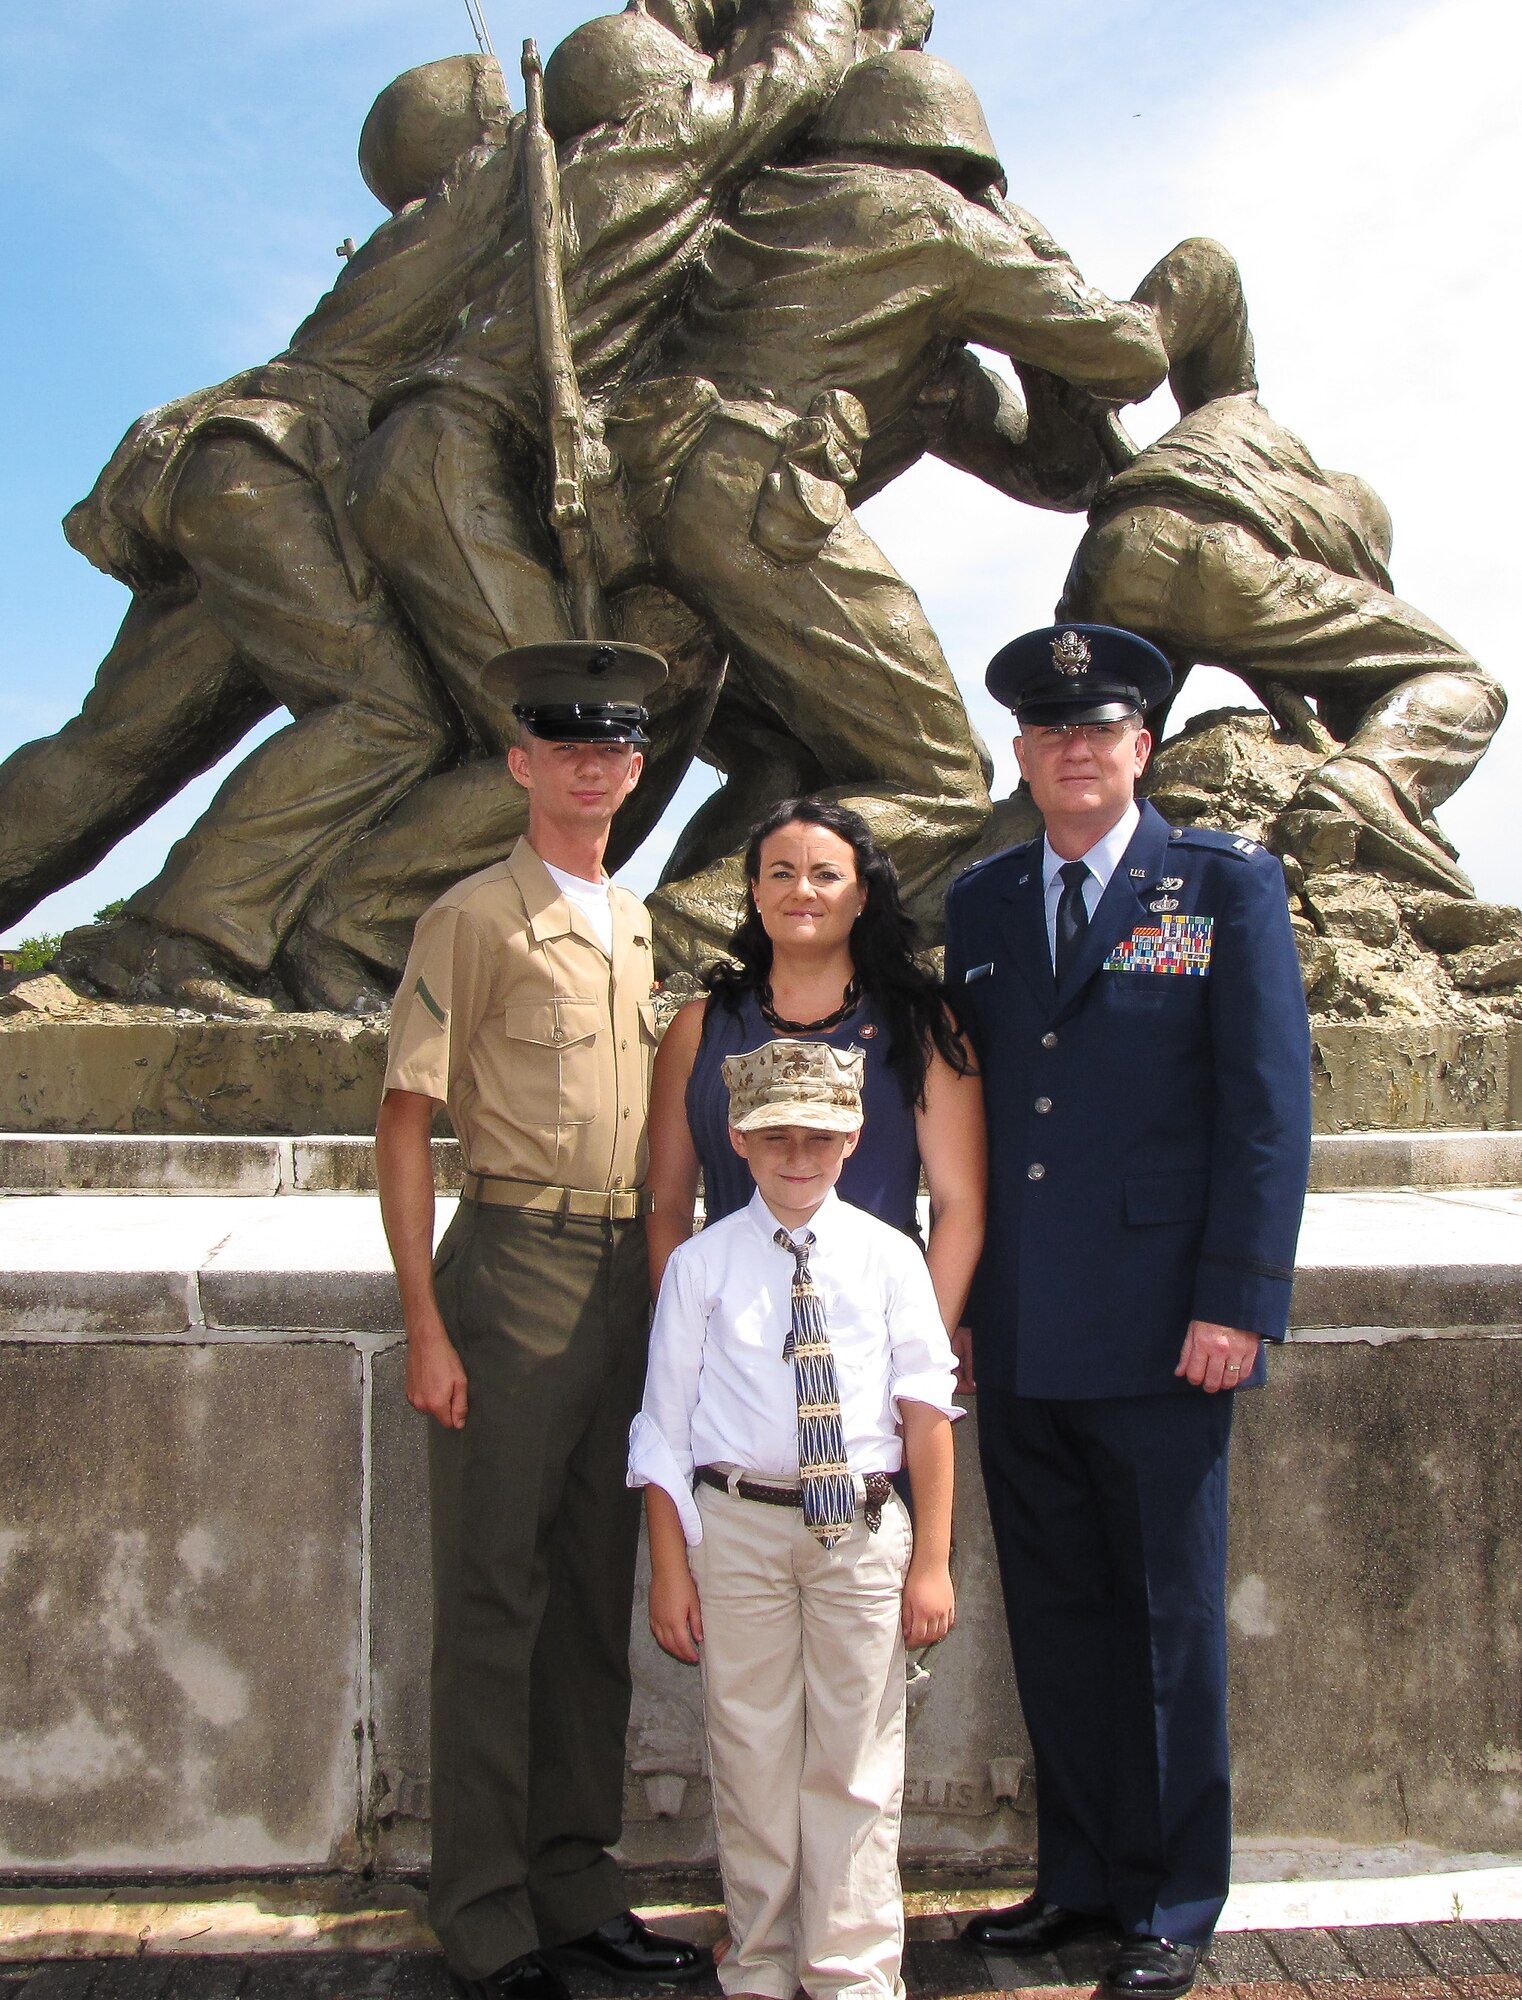 U.S. Air Force Capt. Robert Brumfield, an operations officer with the 116th Security Forces Squadron, Georgia Air National Guard, poses with his family including; son U.S. Marine Pfc. Blake Brumfield, wife Theresa and son Zane in front of the Iwo Jima statue at Marine Corp Recruit Depot, Parris Island, S.C., June 05, 2014. Brumfield and his family posed for the photo after Blake’s graduation from boot camp. (Contributed photo/Released)